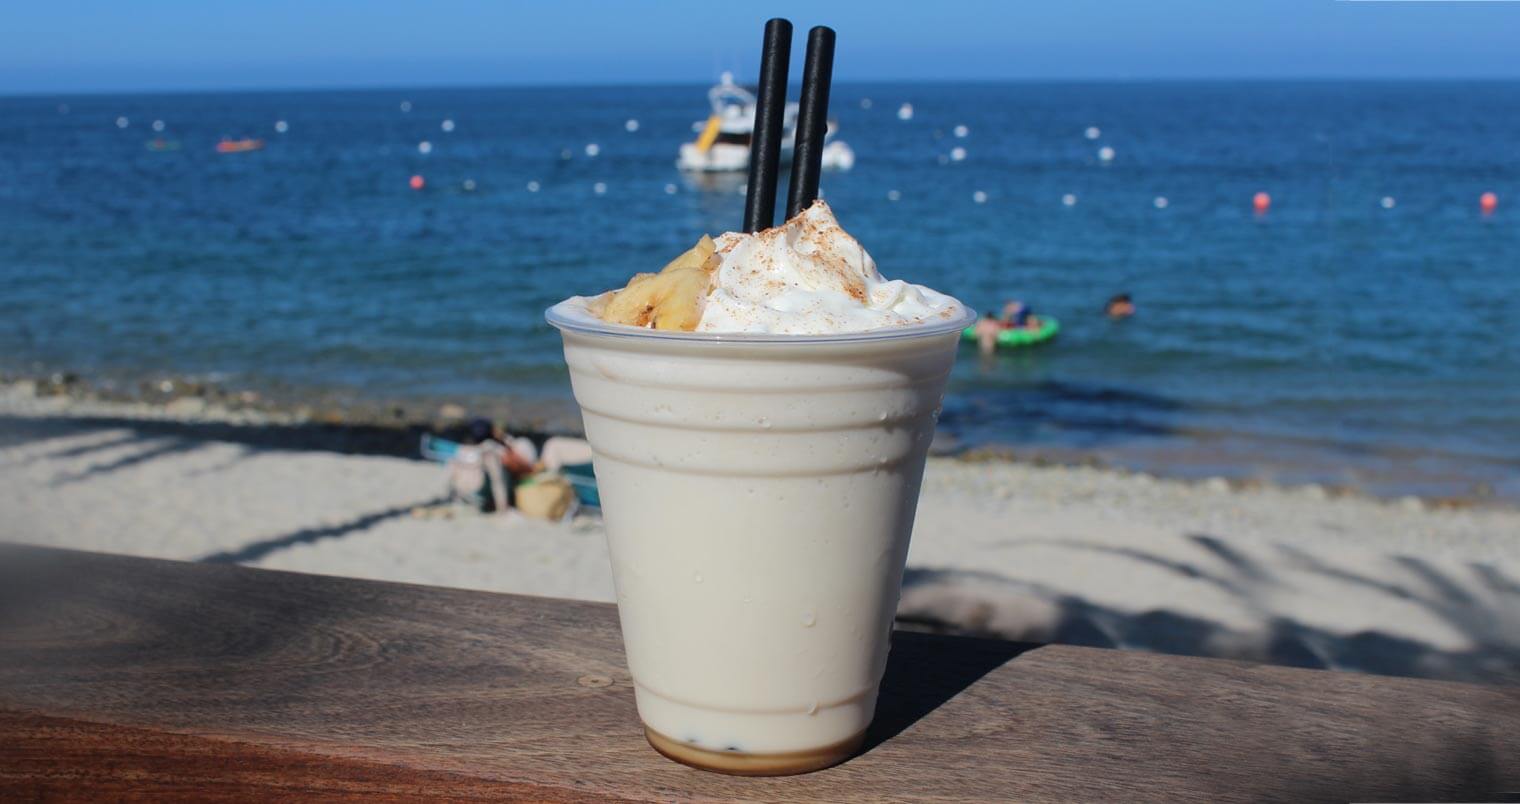 Buffalo Milk Cocktail, plastic cup and straws, beach background, featured image